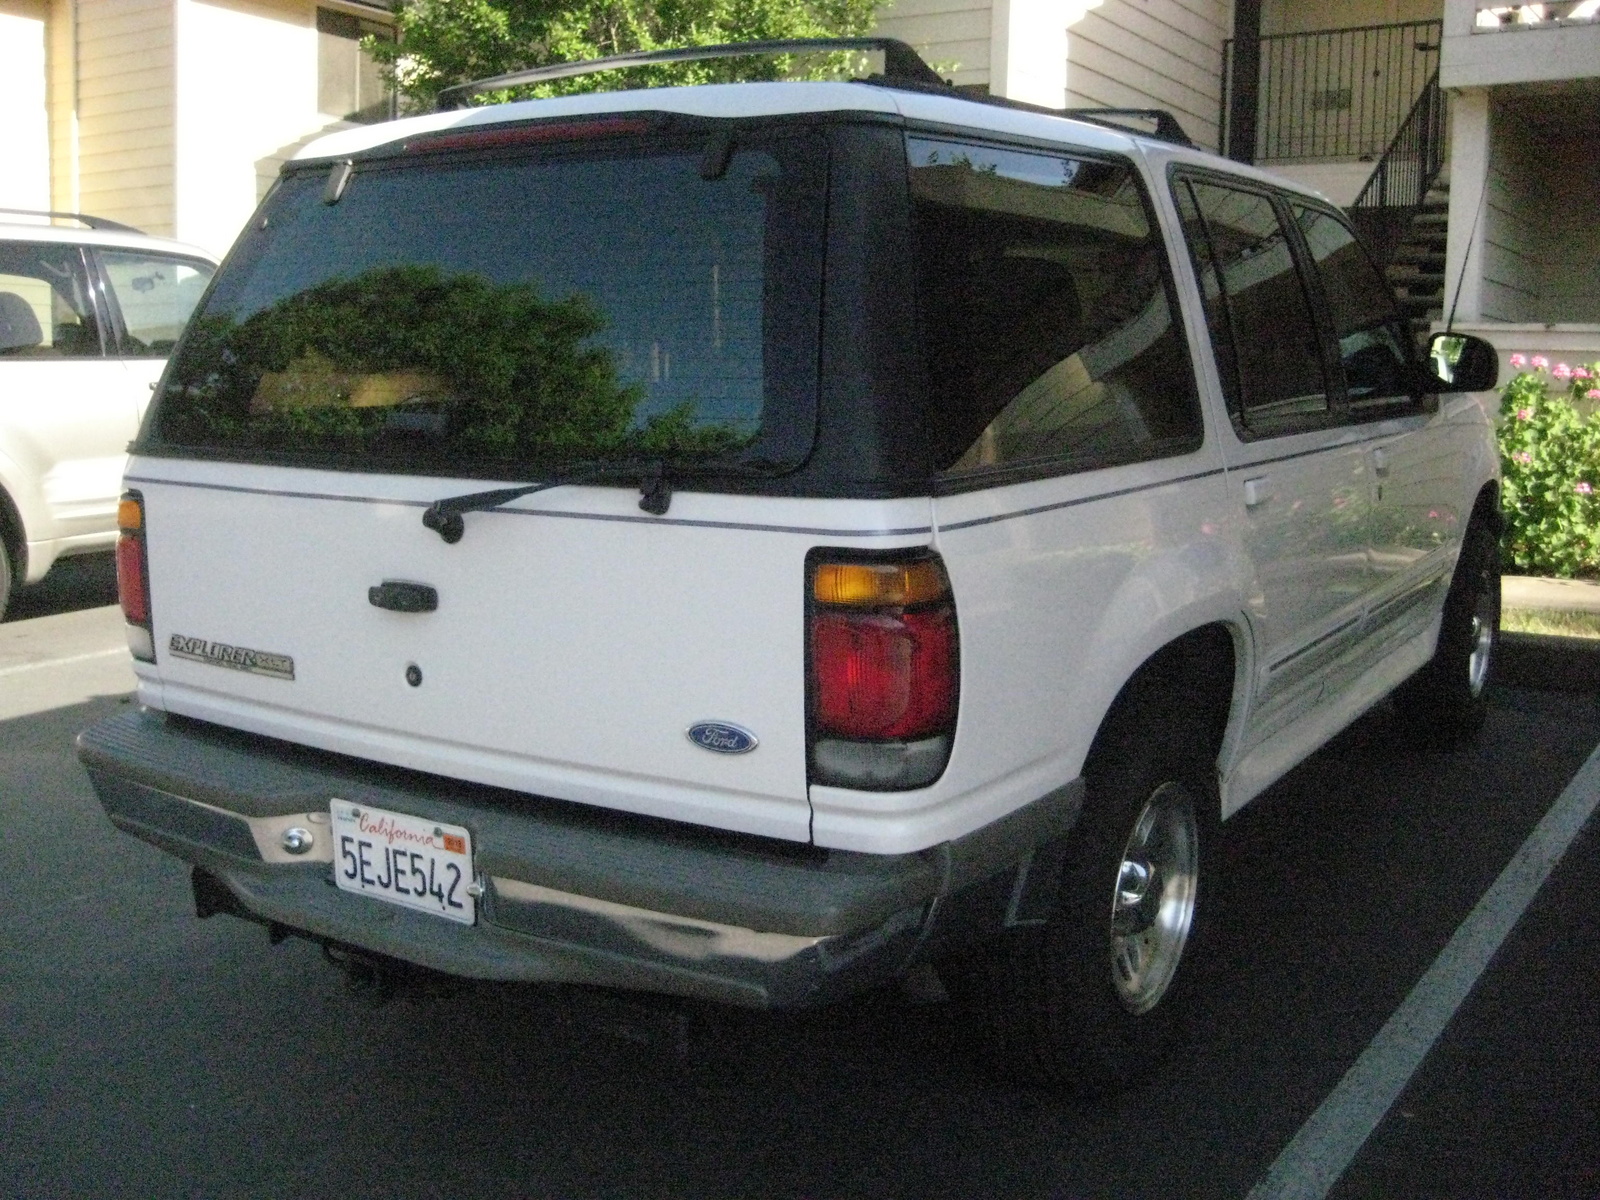 95 Ford explorer limited edition